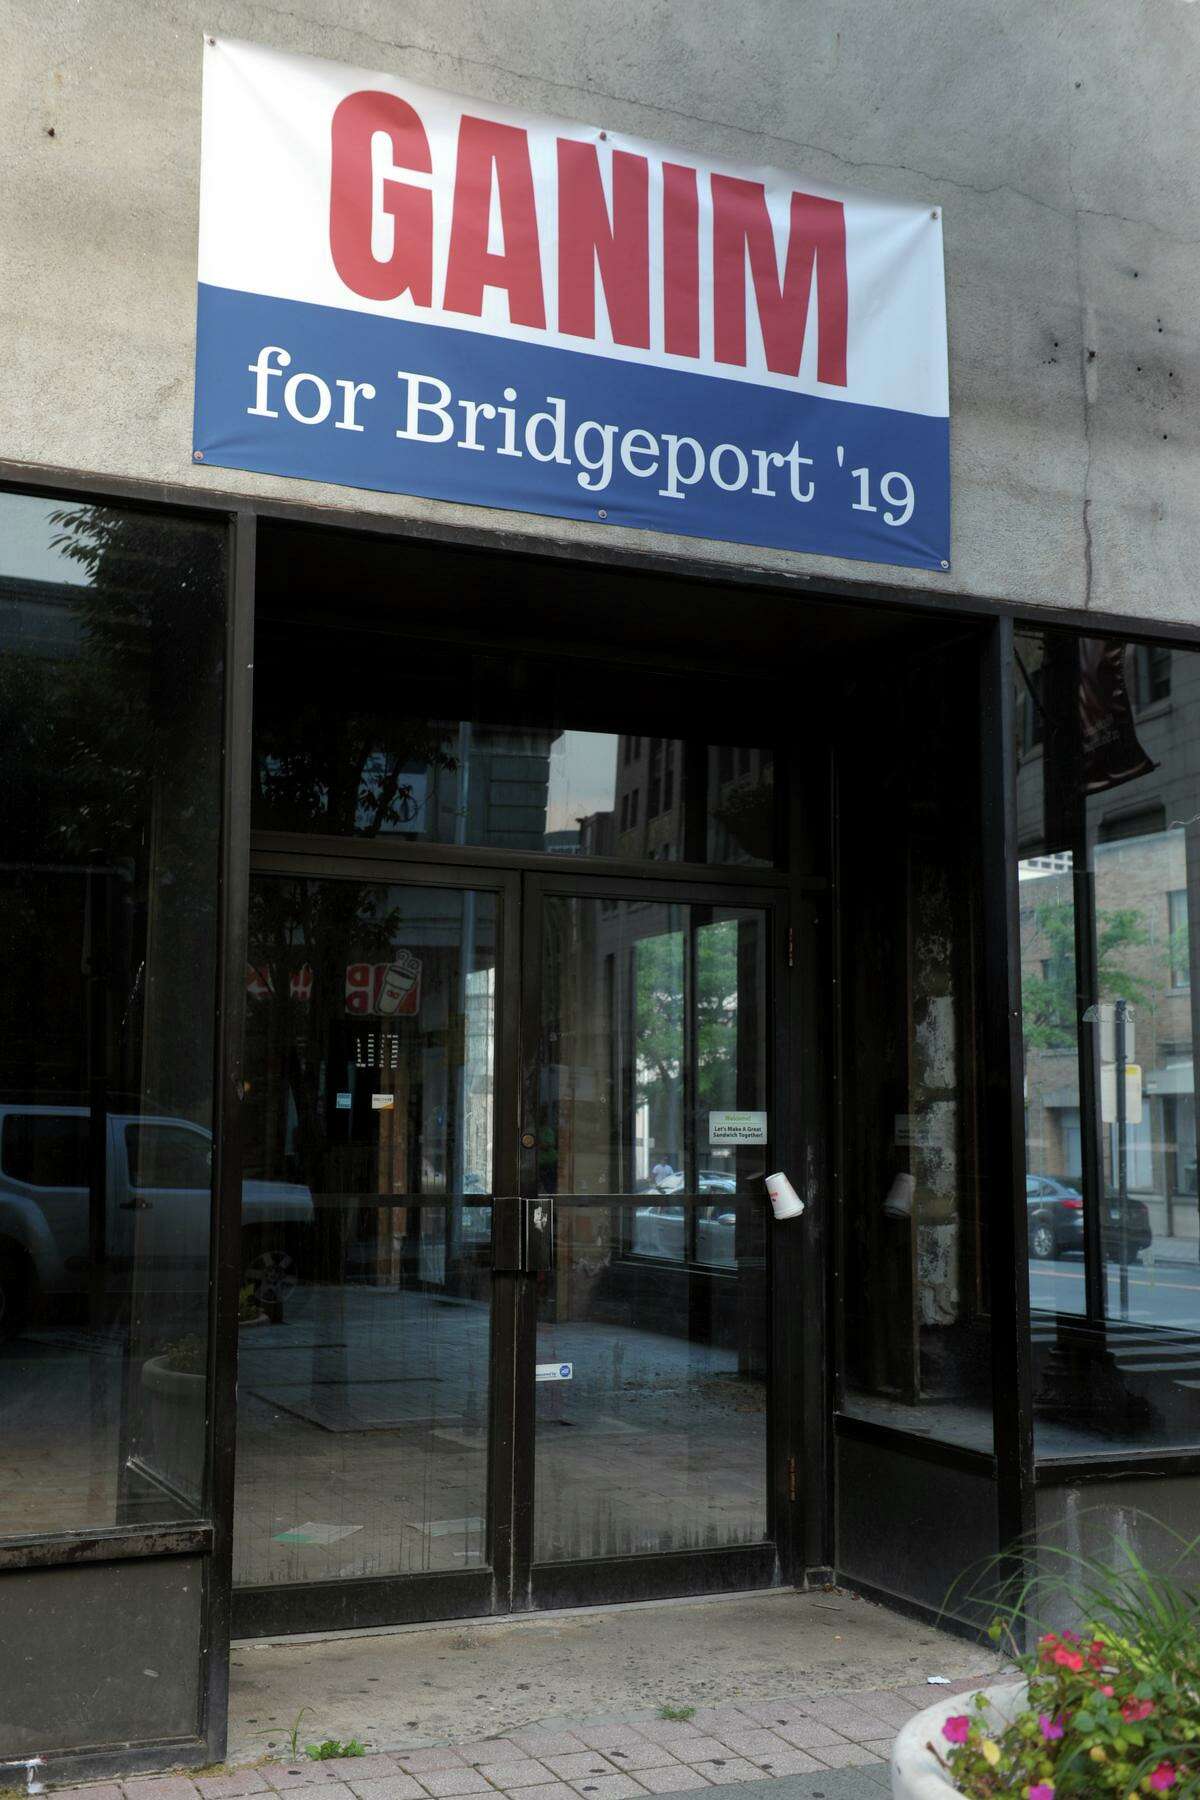 Campaign signs for Mayor Joe Ganim hang on the former Subway Restaurant location on Main Street, in downtown Bridgeport, Conn. July 29, 2019. The Subway has been closed since a fire in 2017.